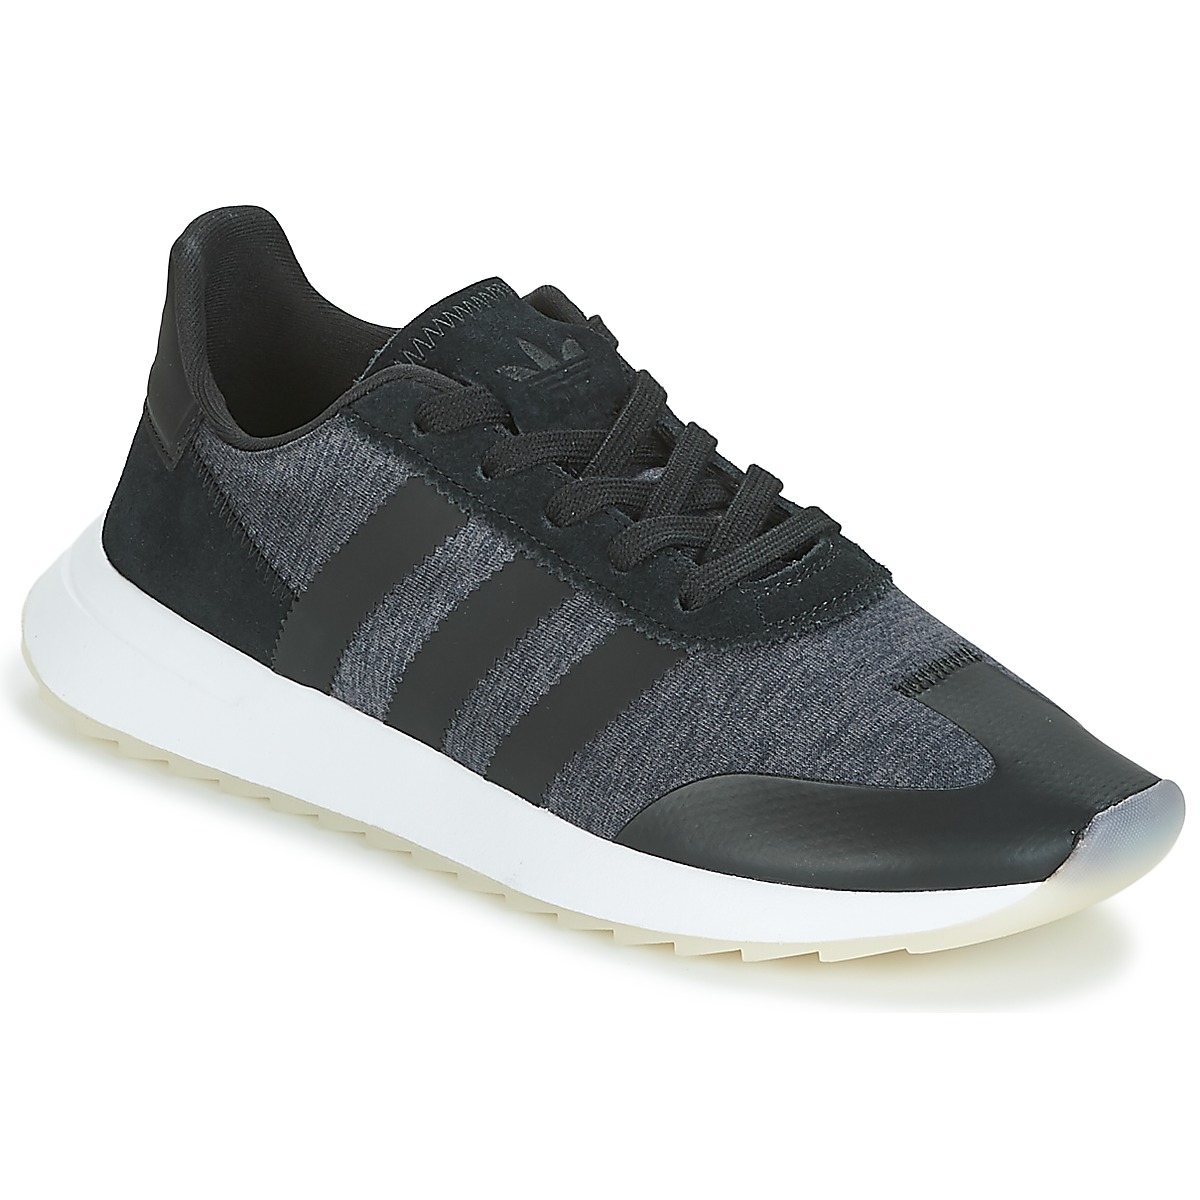 Grapa caldera cráneo adidas Originals FLB RUNNER W Black - Fast delivery | Spartoo Europe ! -  Shoes Low top trainers Women 79,20 €